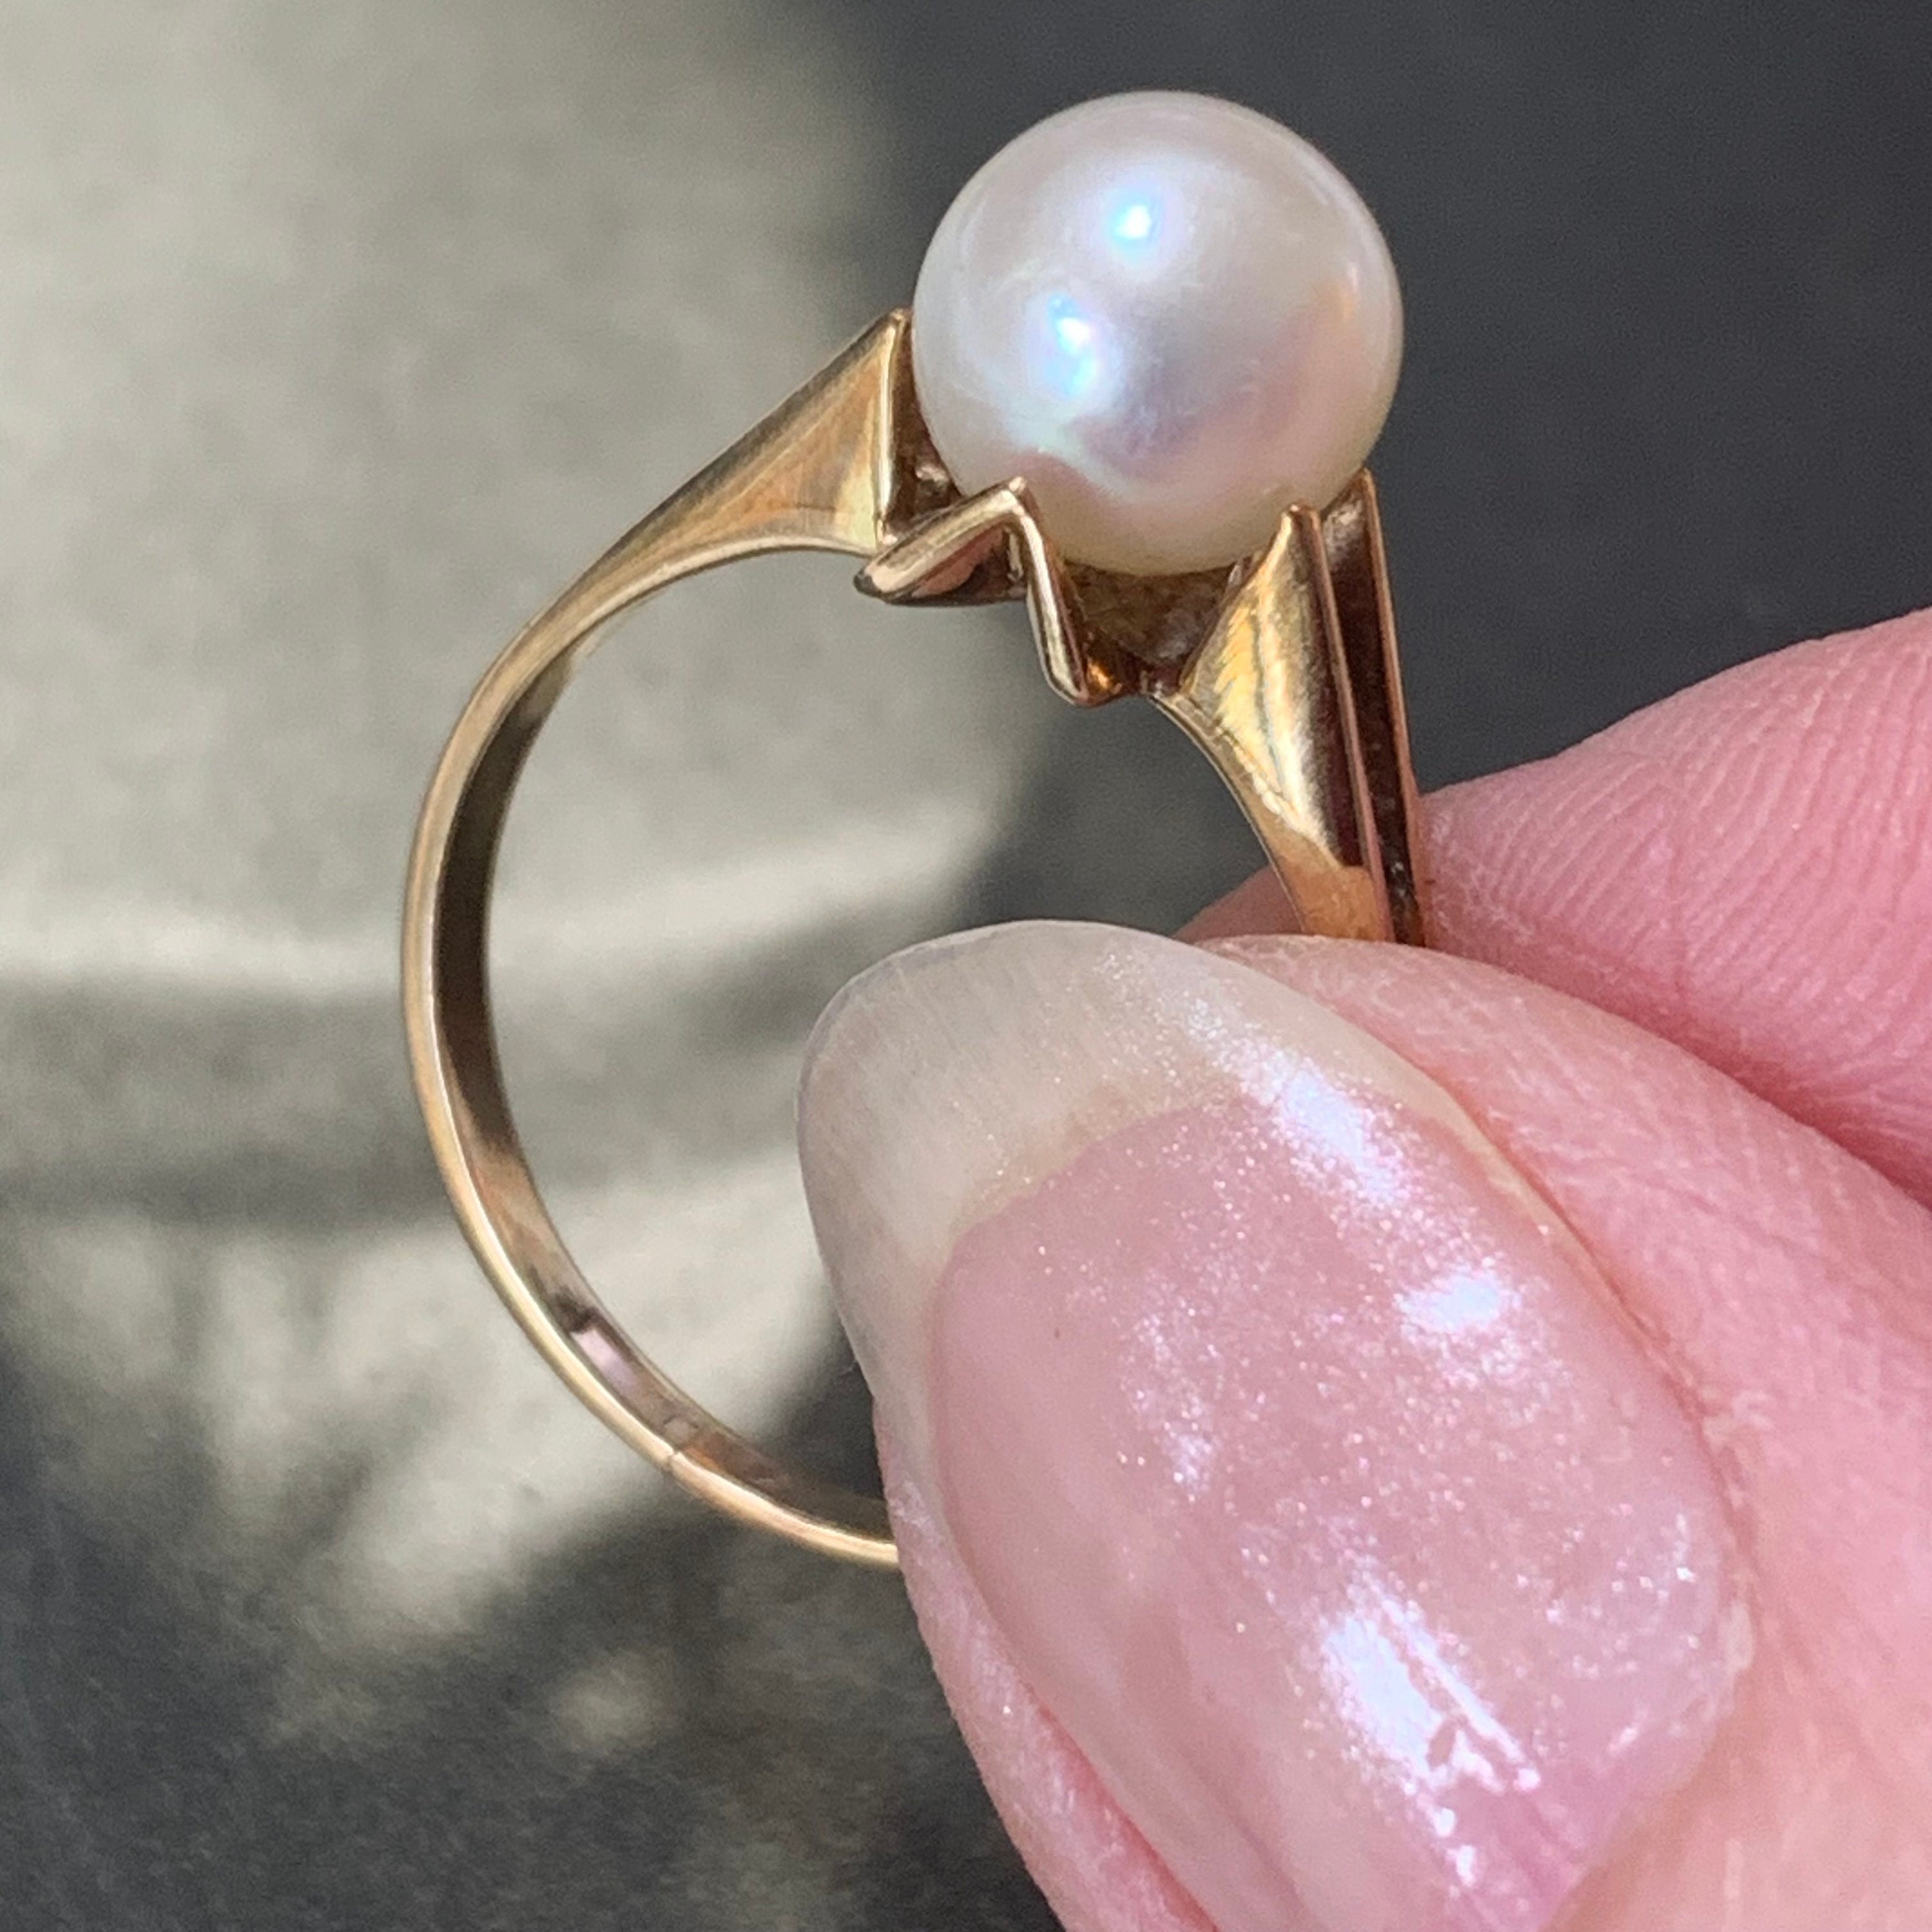 Vintage 14Ct Yellow Gold Pearl Ring Japanese 8mm Akoya Cultured Pearl. Similar To Mikimoto Quality Ring Size 7.5 Us